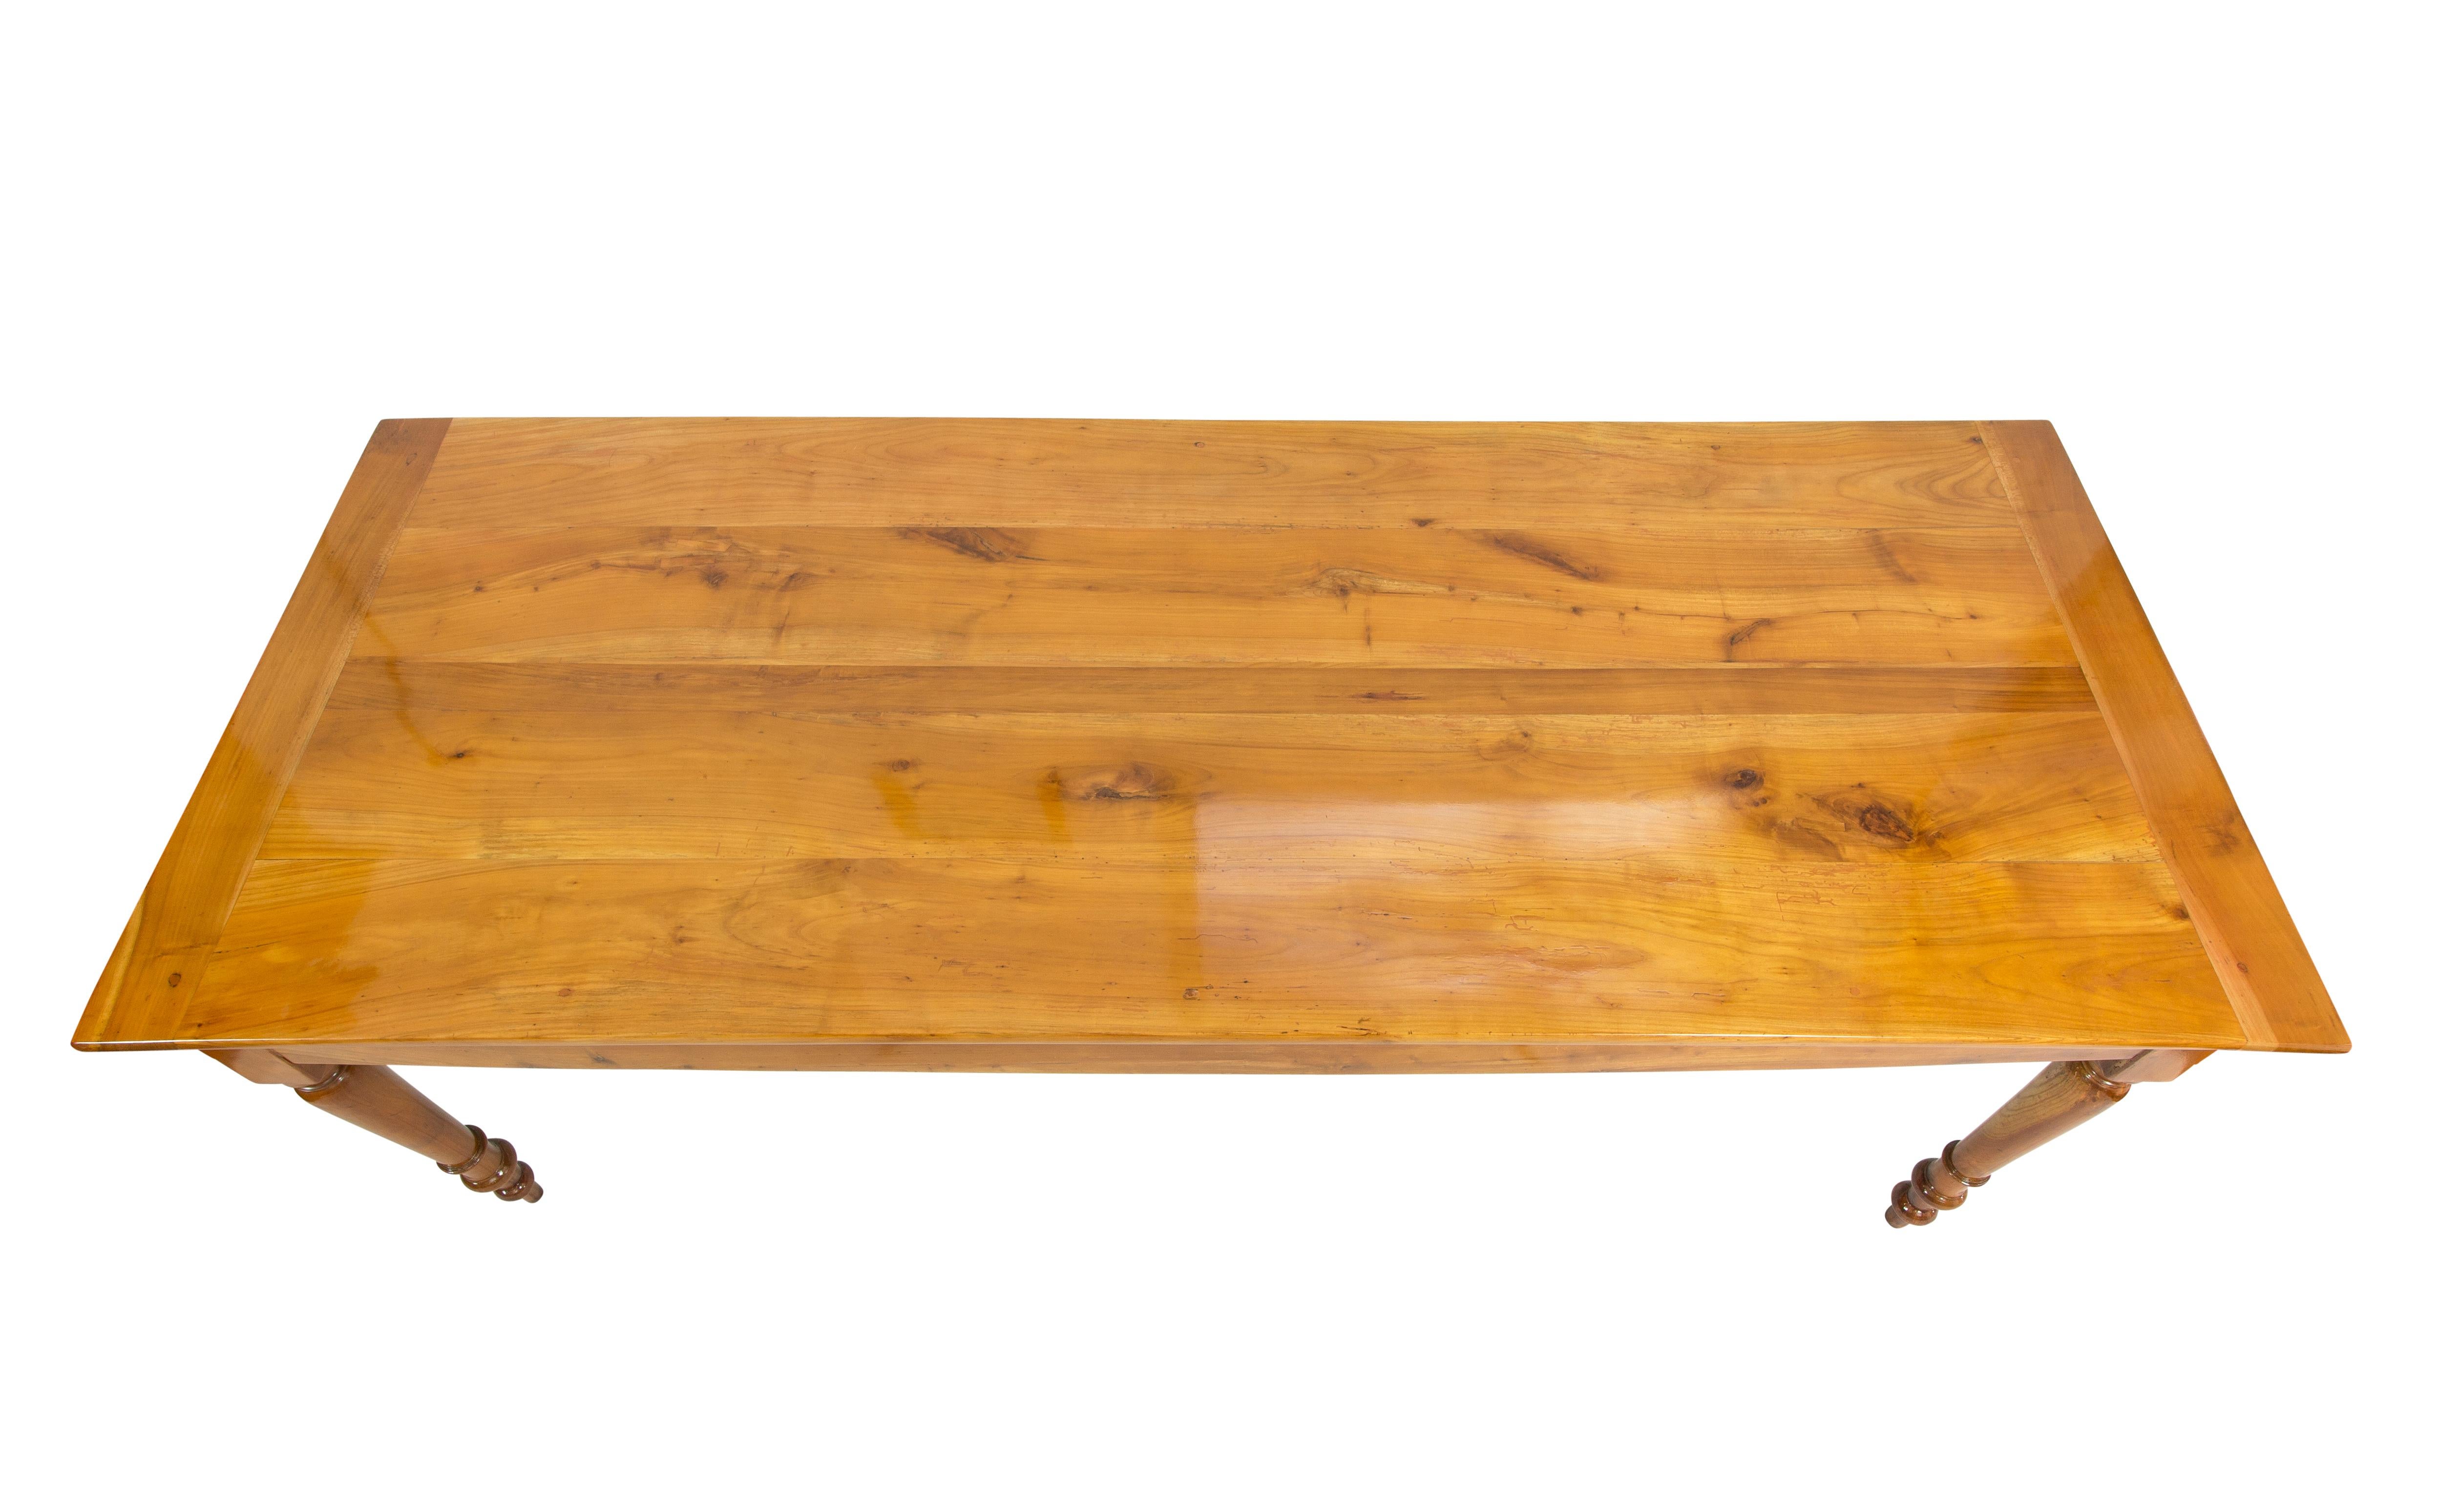 Farmhouse table in solid cherrywood, dating from the late Biedermeier period around 1850, with a drawer (cherry / pine wood.) on one side and a pull-out top made of oak/cherrywood on the other. 
The space from the floor to the frame is 61 cm. 
The